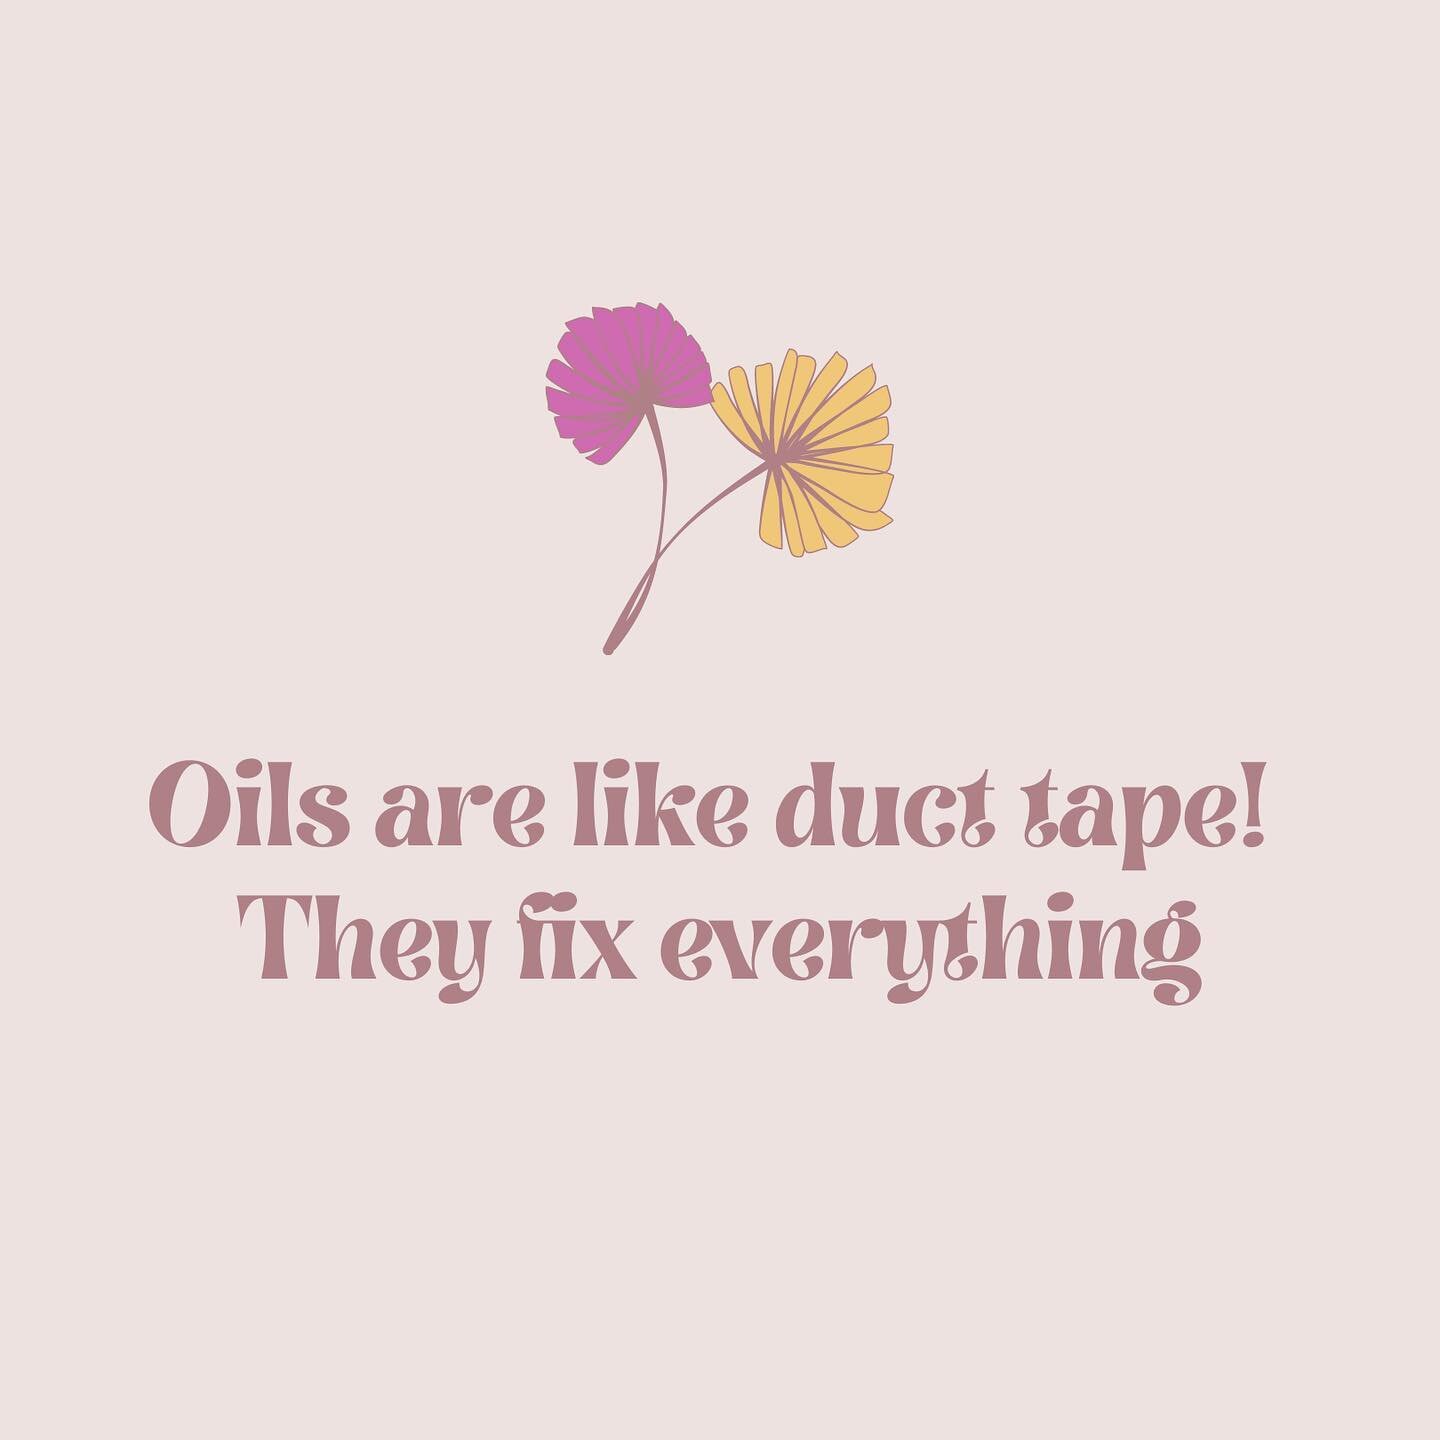 Oils are like duct tape!
.
.
They fix everything
.
.
Drop an emoji below if you agree!

#vibrantliving #essentialoils #naturesmedicine #simplesolutions #aromatherapy #holisticliving #doterralifestyle #introtooils #fuerteventura #laoliva #corralejo